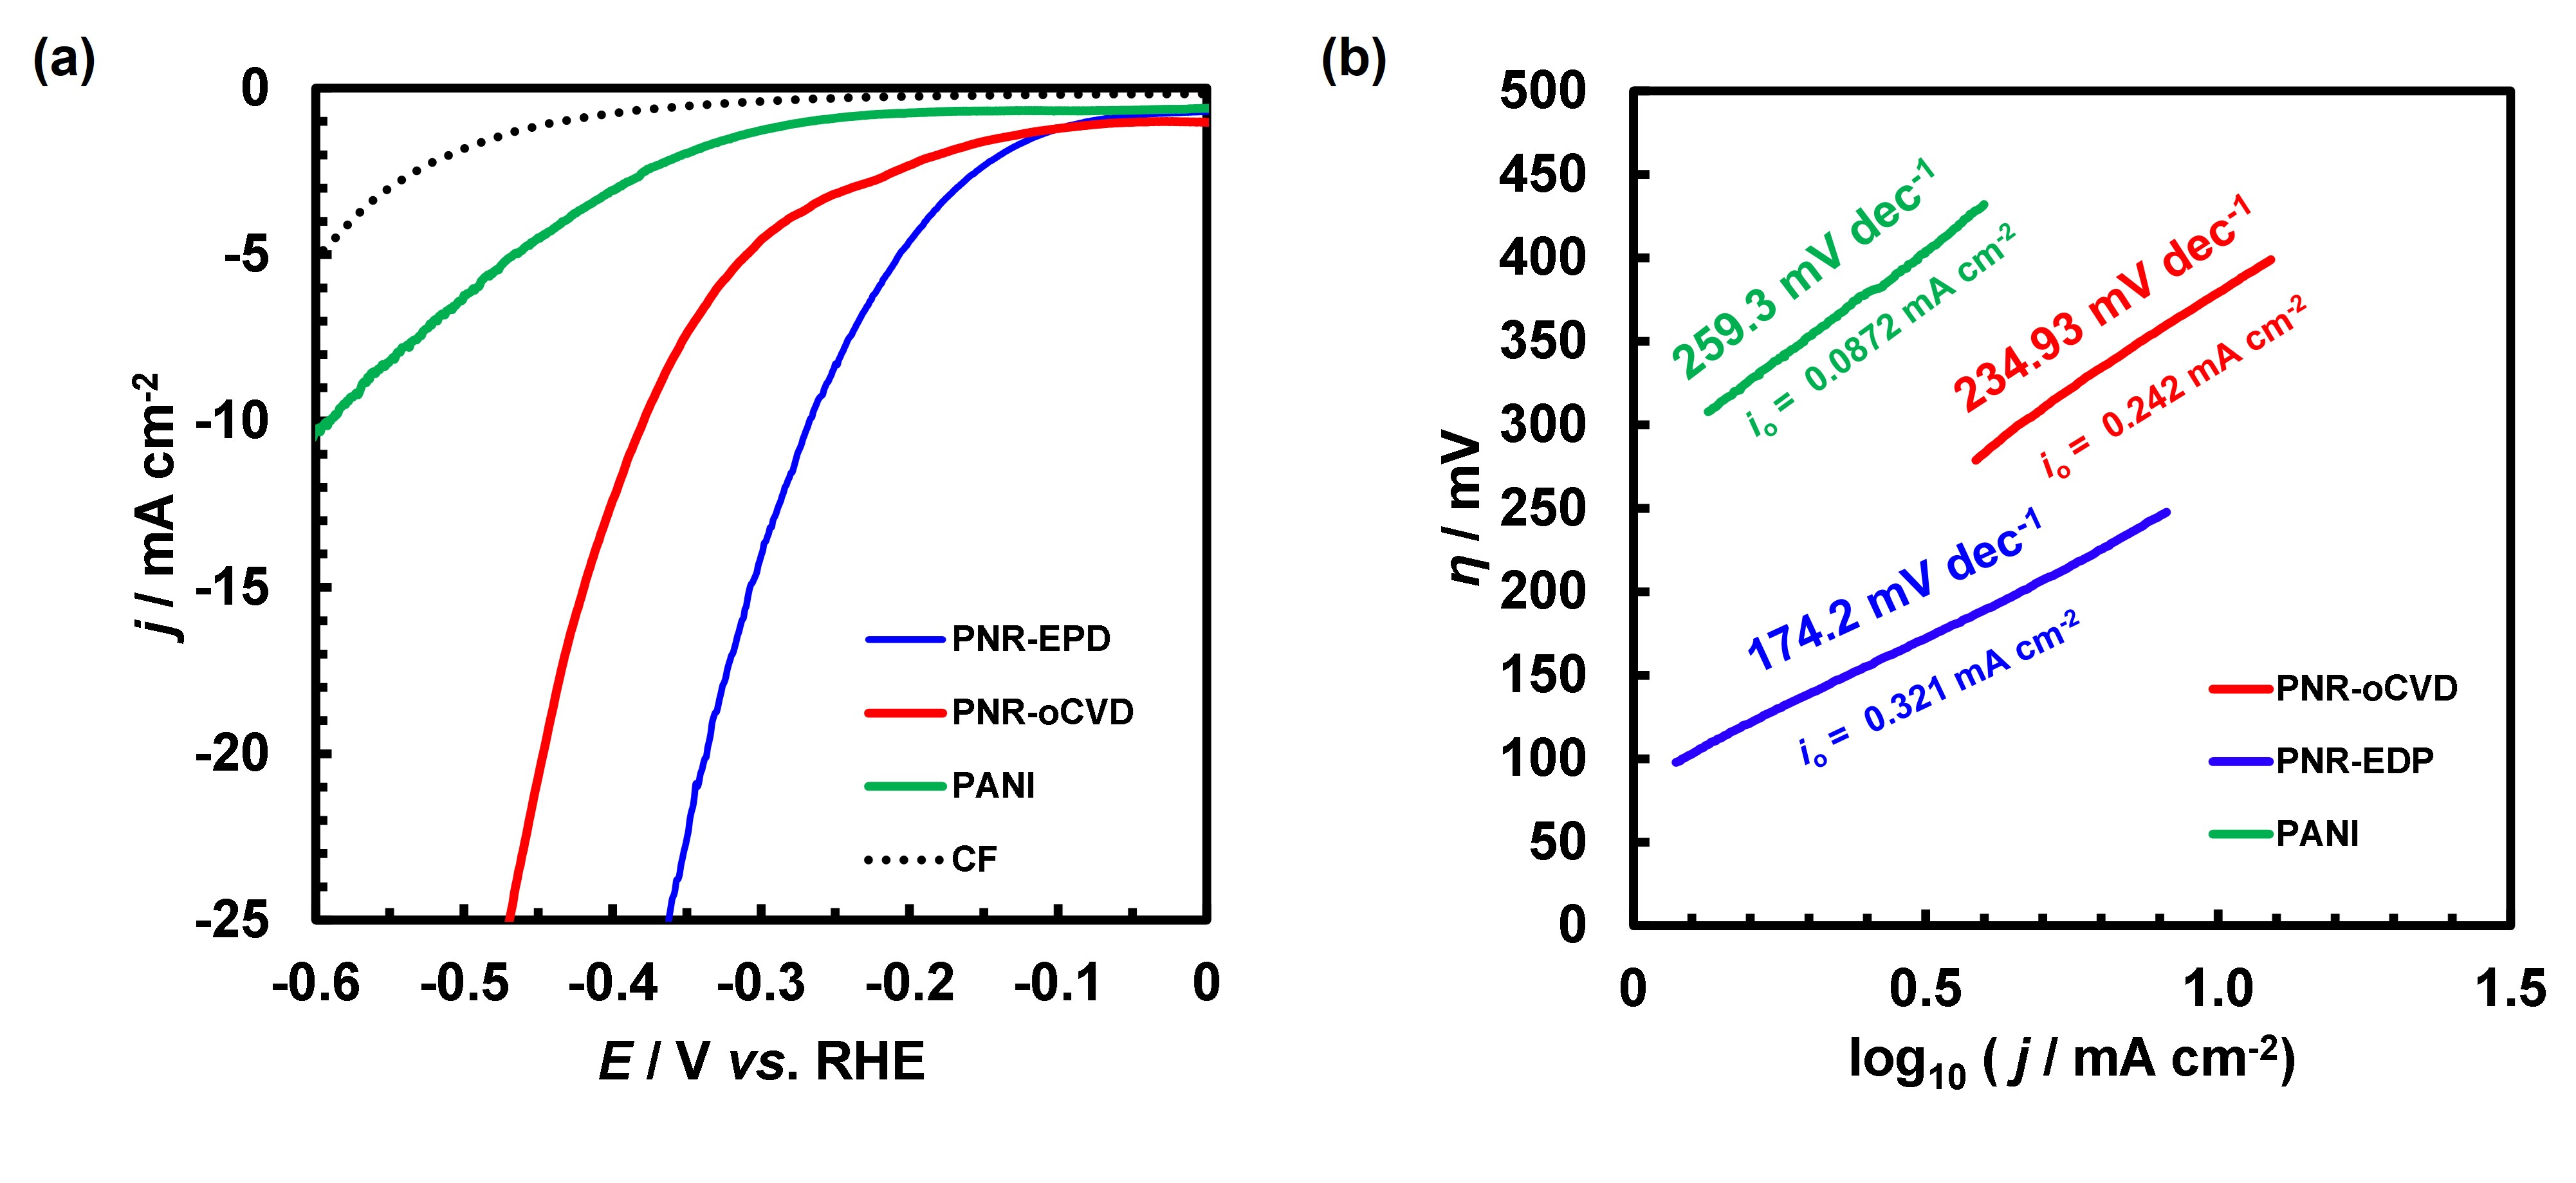 Fig.3. HER catalytic activity evaluation: (a) Liner sweep voltammogram (10 mV s−1) and (b) Tafel plot of PNR-EPD and PNR-oCVD as compared to PANI, CF (blank control) in 1 M TfOH electrolyte.